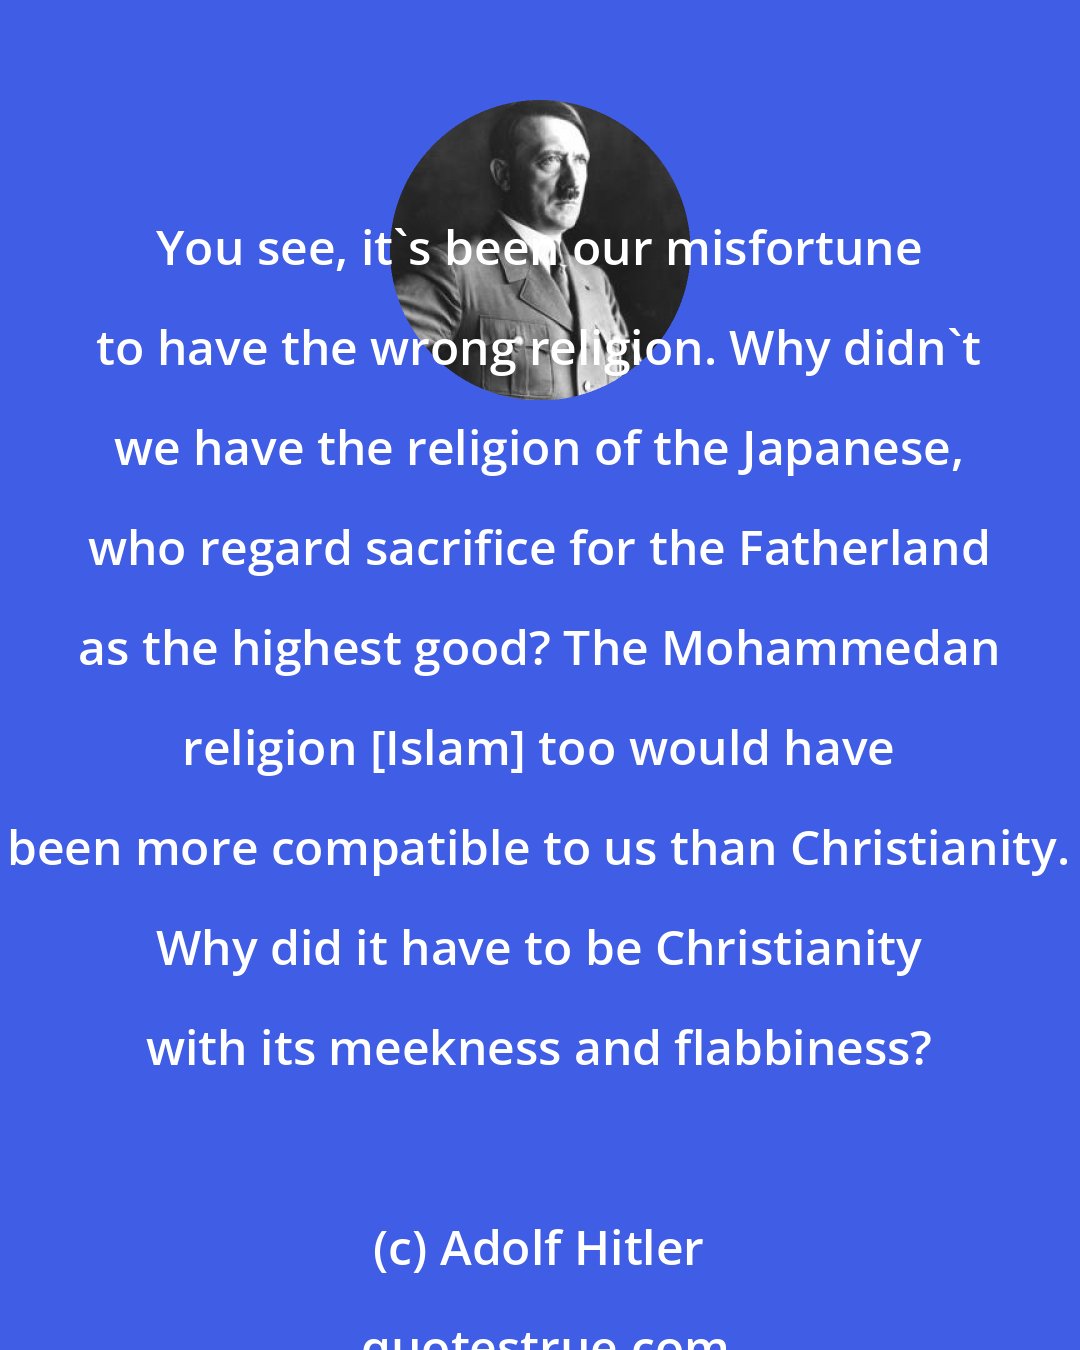 Adolf Hitler: You see, it's been our misfortune to have the wrong religion. Why didn't we have the religion of the Japanese, who regard sacrifice for the Fatherland as the highest good? The Mohammedan religion [Islam] too would have been more compatible to us than Christianity. Why did it have to be Christianity with its meekness and flabbiness?